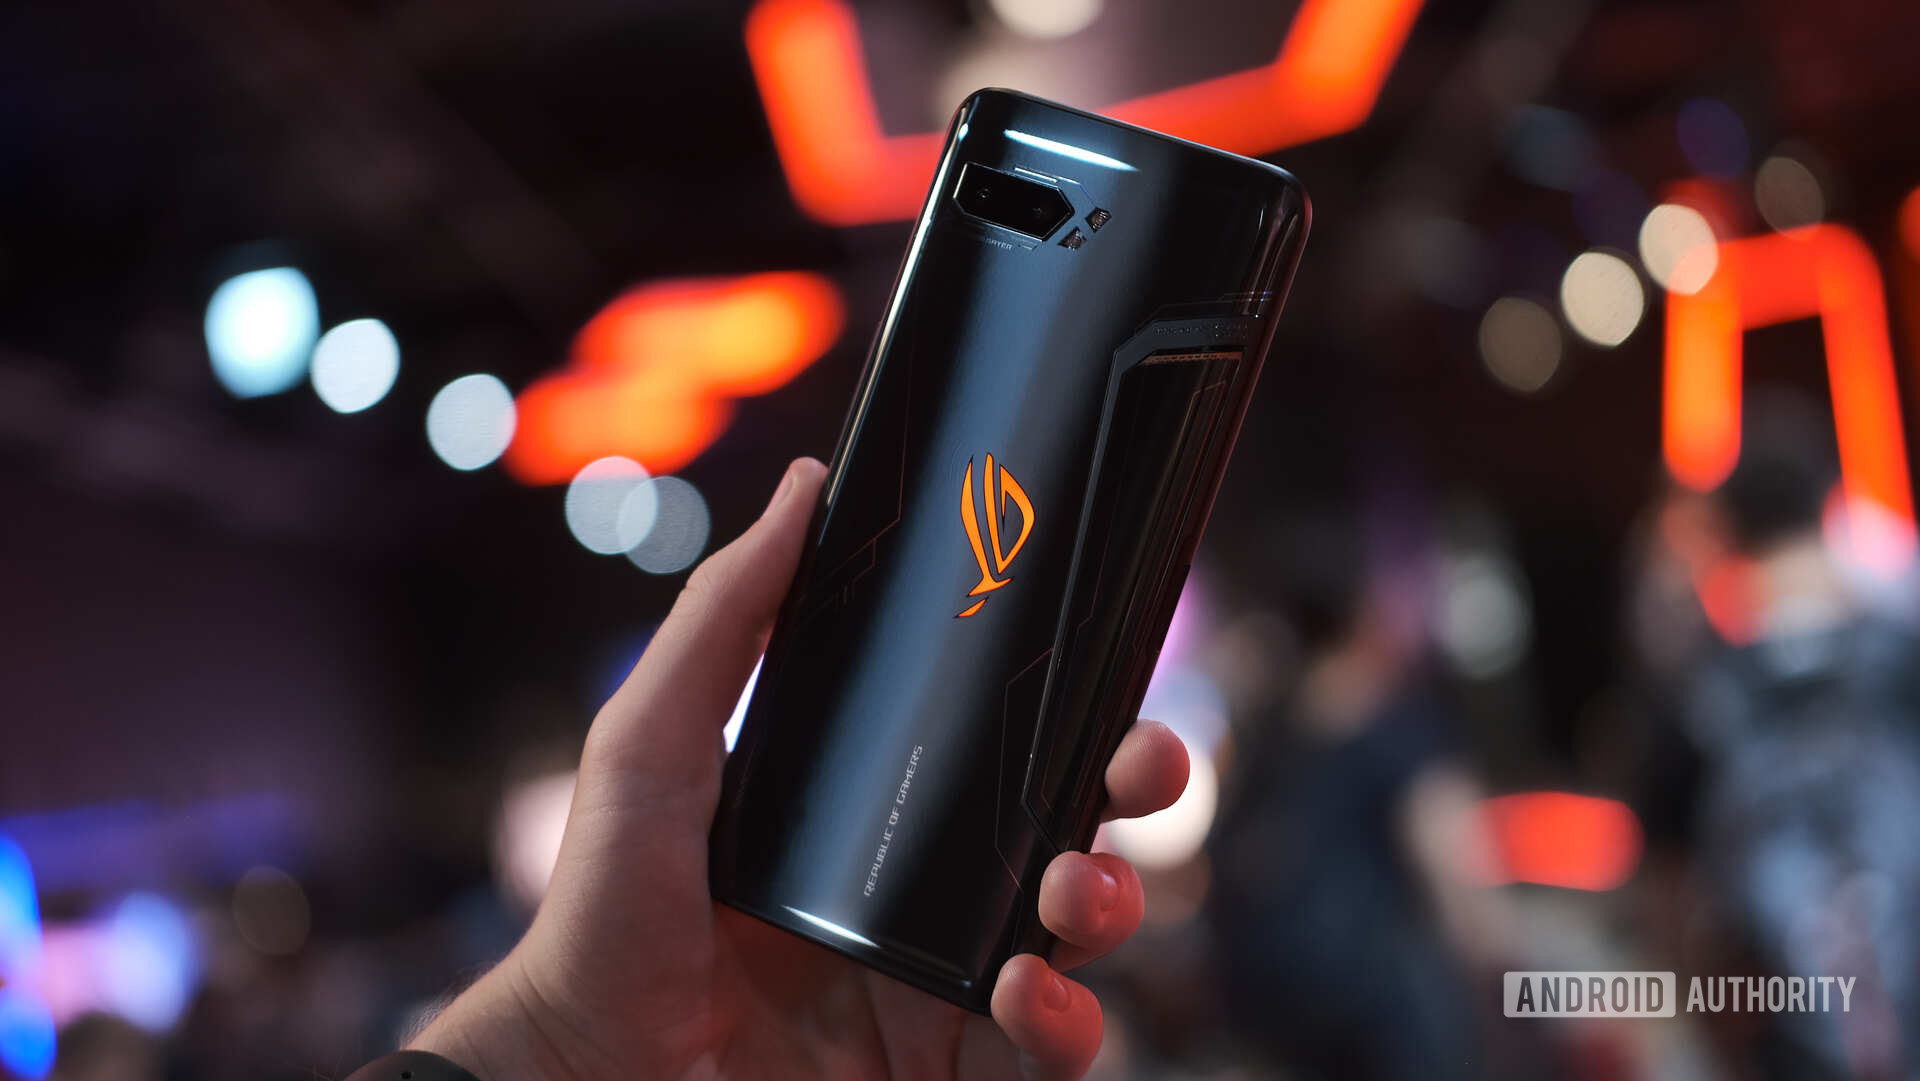 Asus ROG Phone 2 back in hand at angle